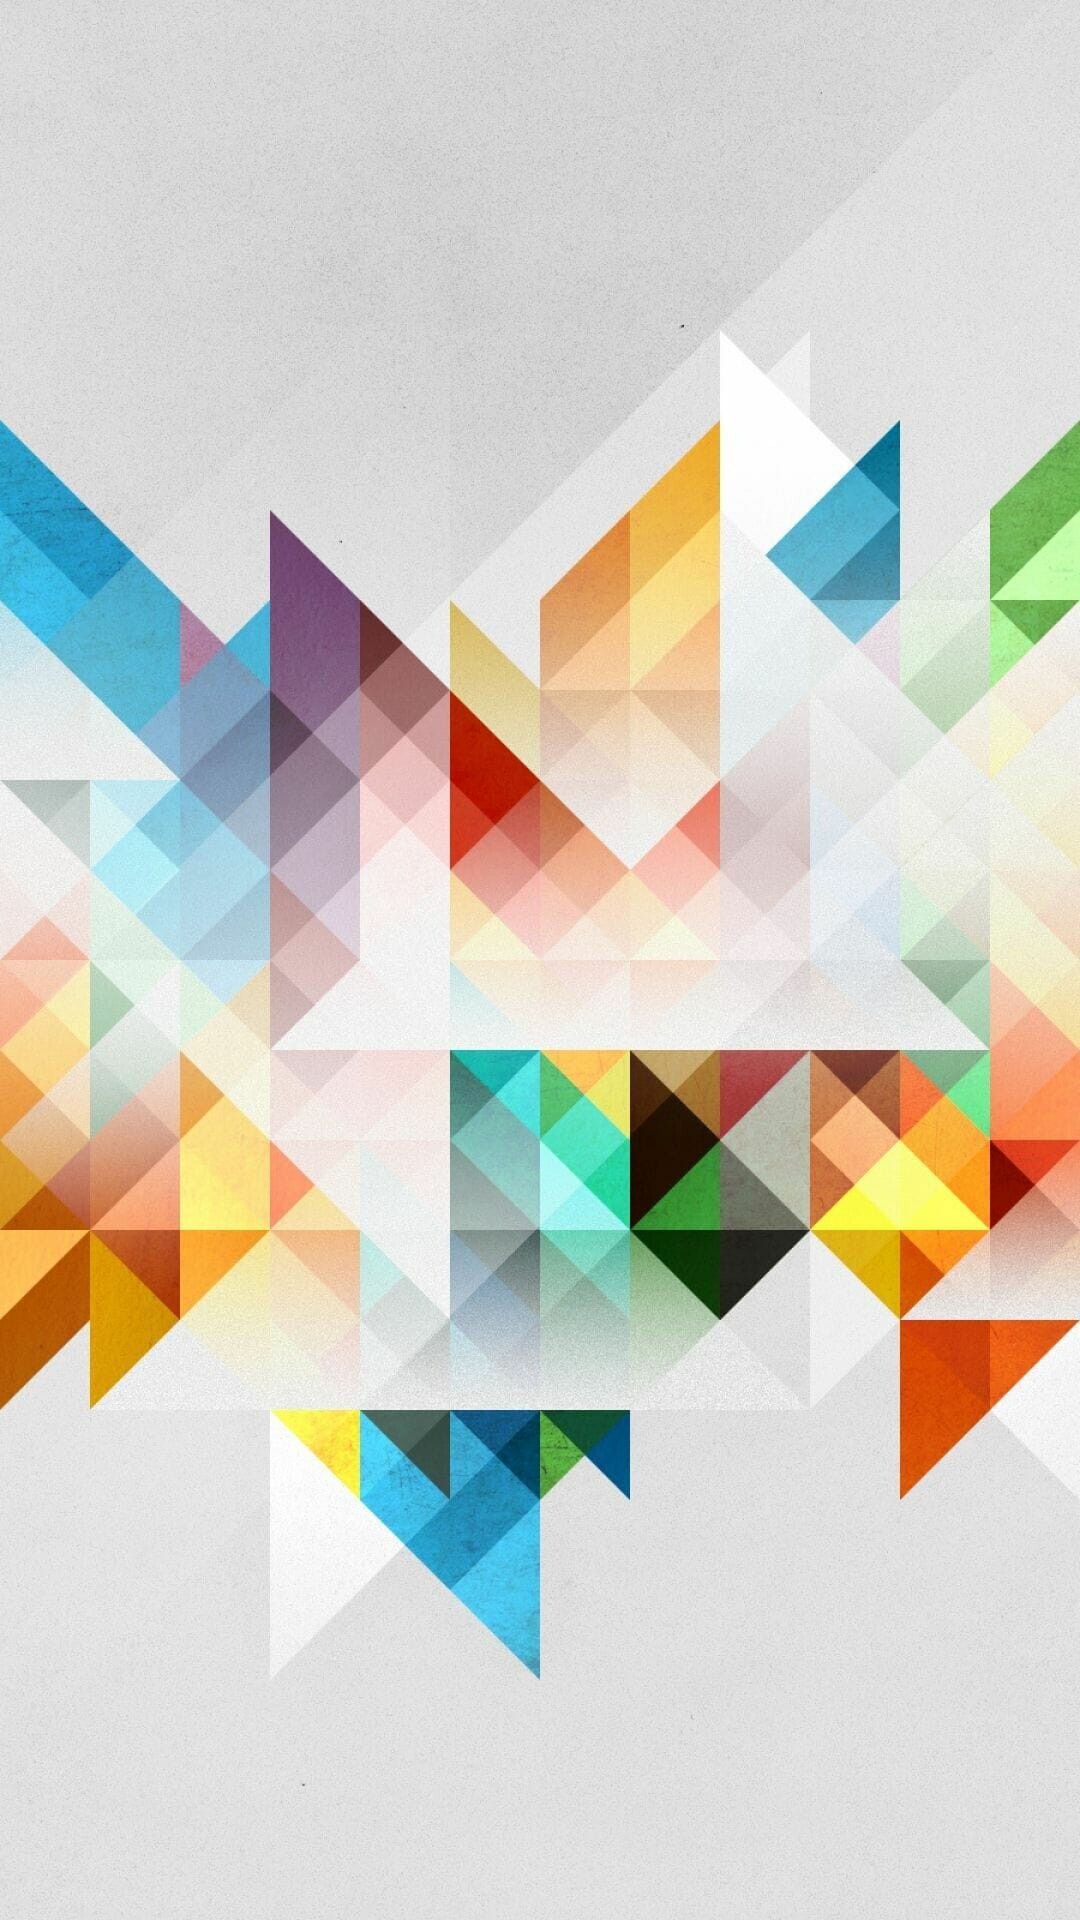 Geometry: Parallel sides, Triangles, Squares, Colorful polygons. 1080x1920 Full HD Background.